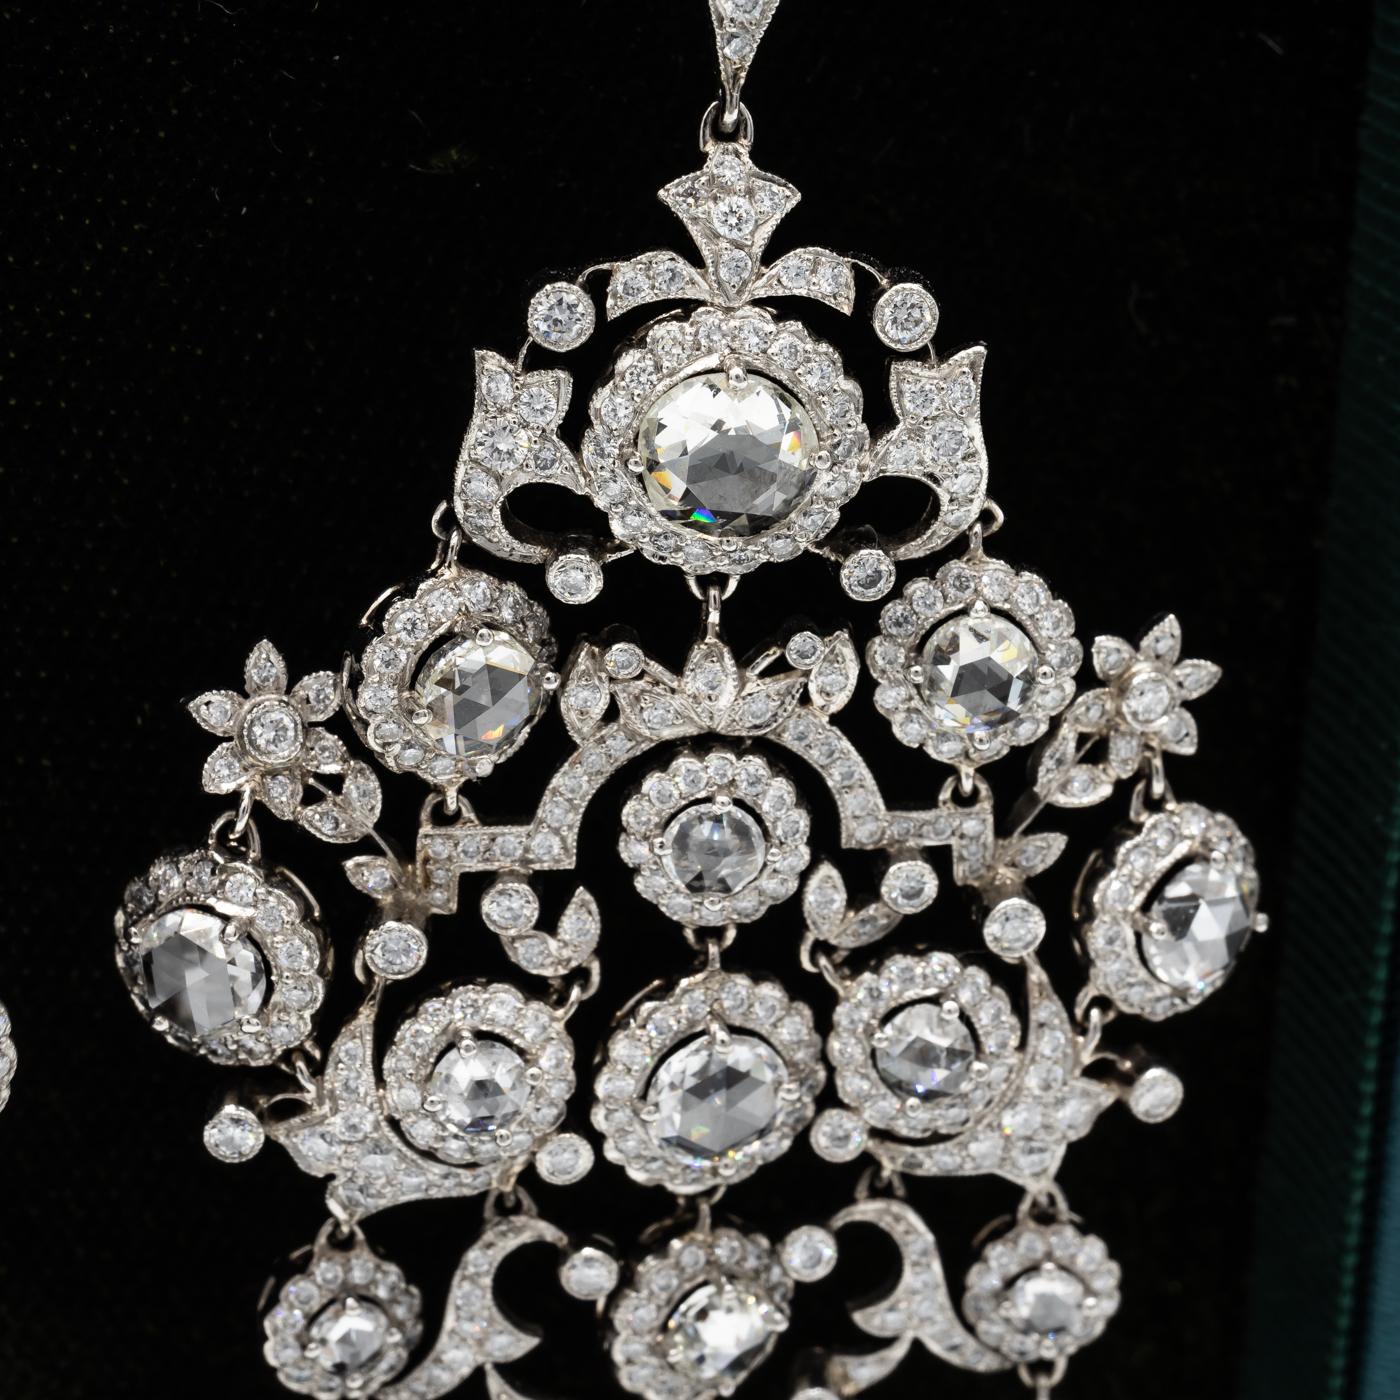 Modern Large Diamond And Platinum Chandelier Earrings, 15.26 Carats For Sale 1